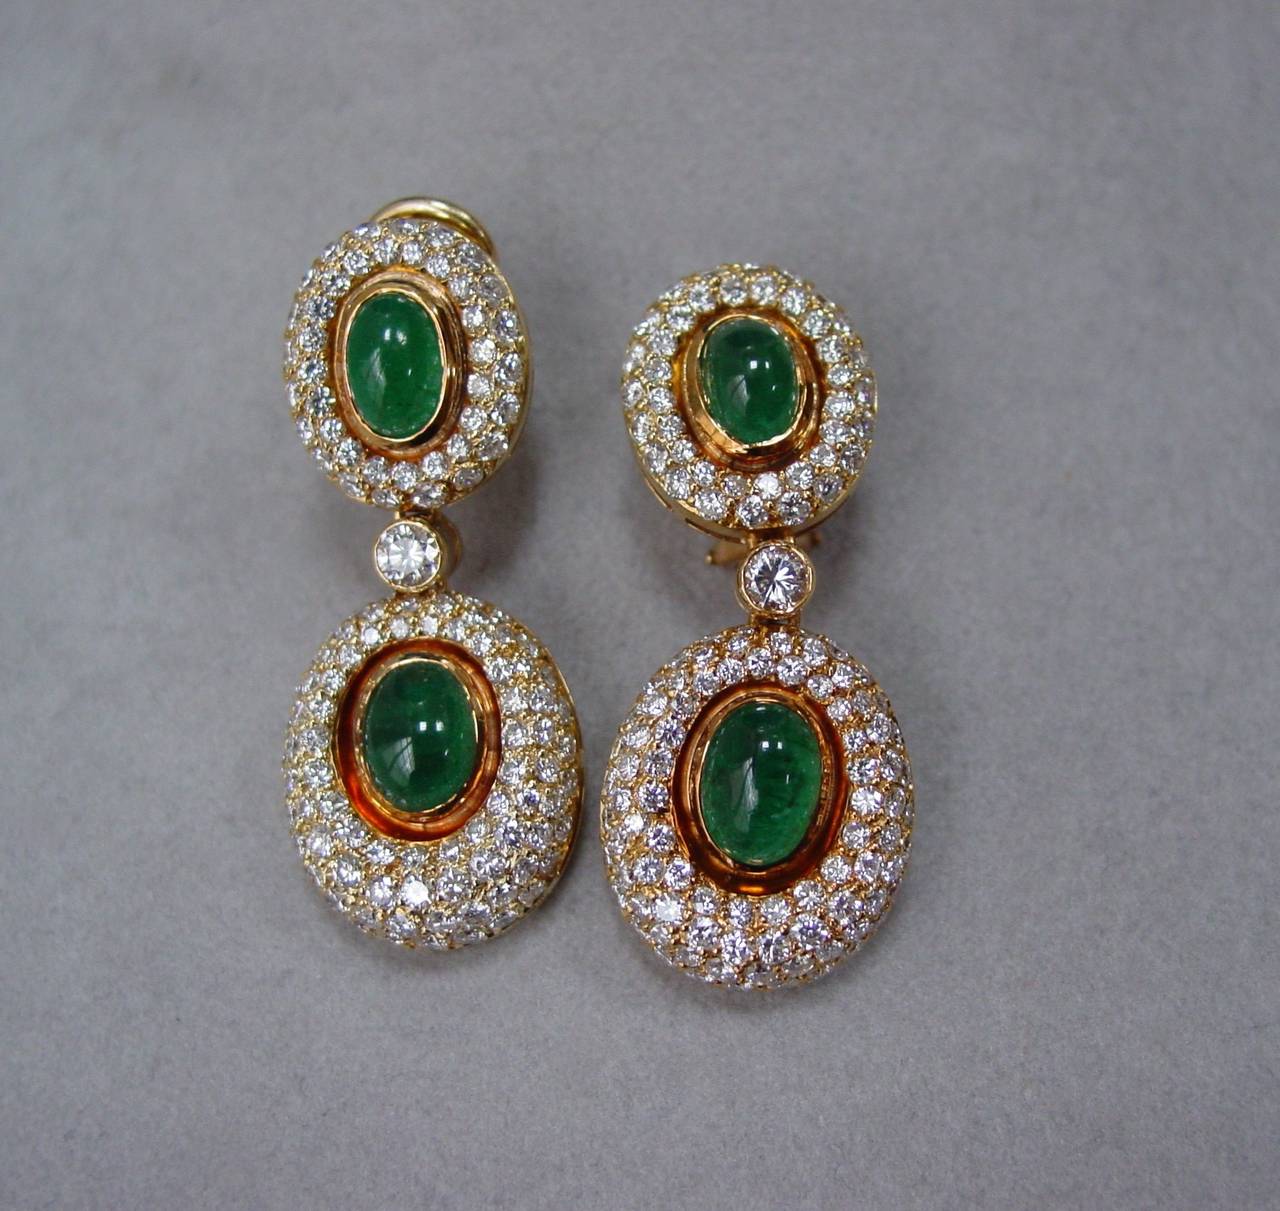 A Cabochon Emerald and Diamond Necklace, Earring and Ring Suite Mounted in 18 Karat Yellow Gold. Featuring approximately 18.80 carats of round brilliant diamonds, G-H in color, VS in clarity and approximately 21 carats of well matched bright,